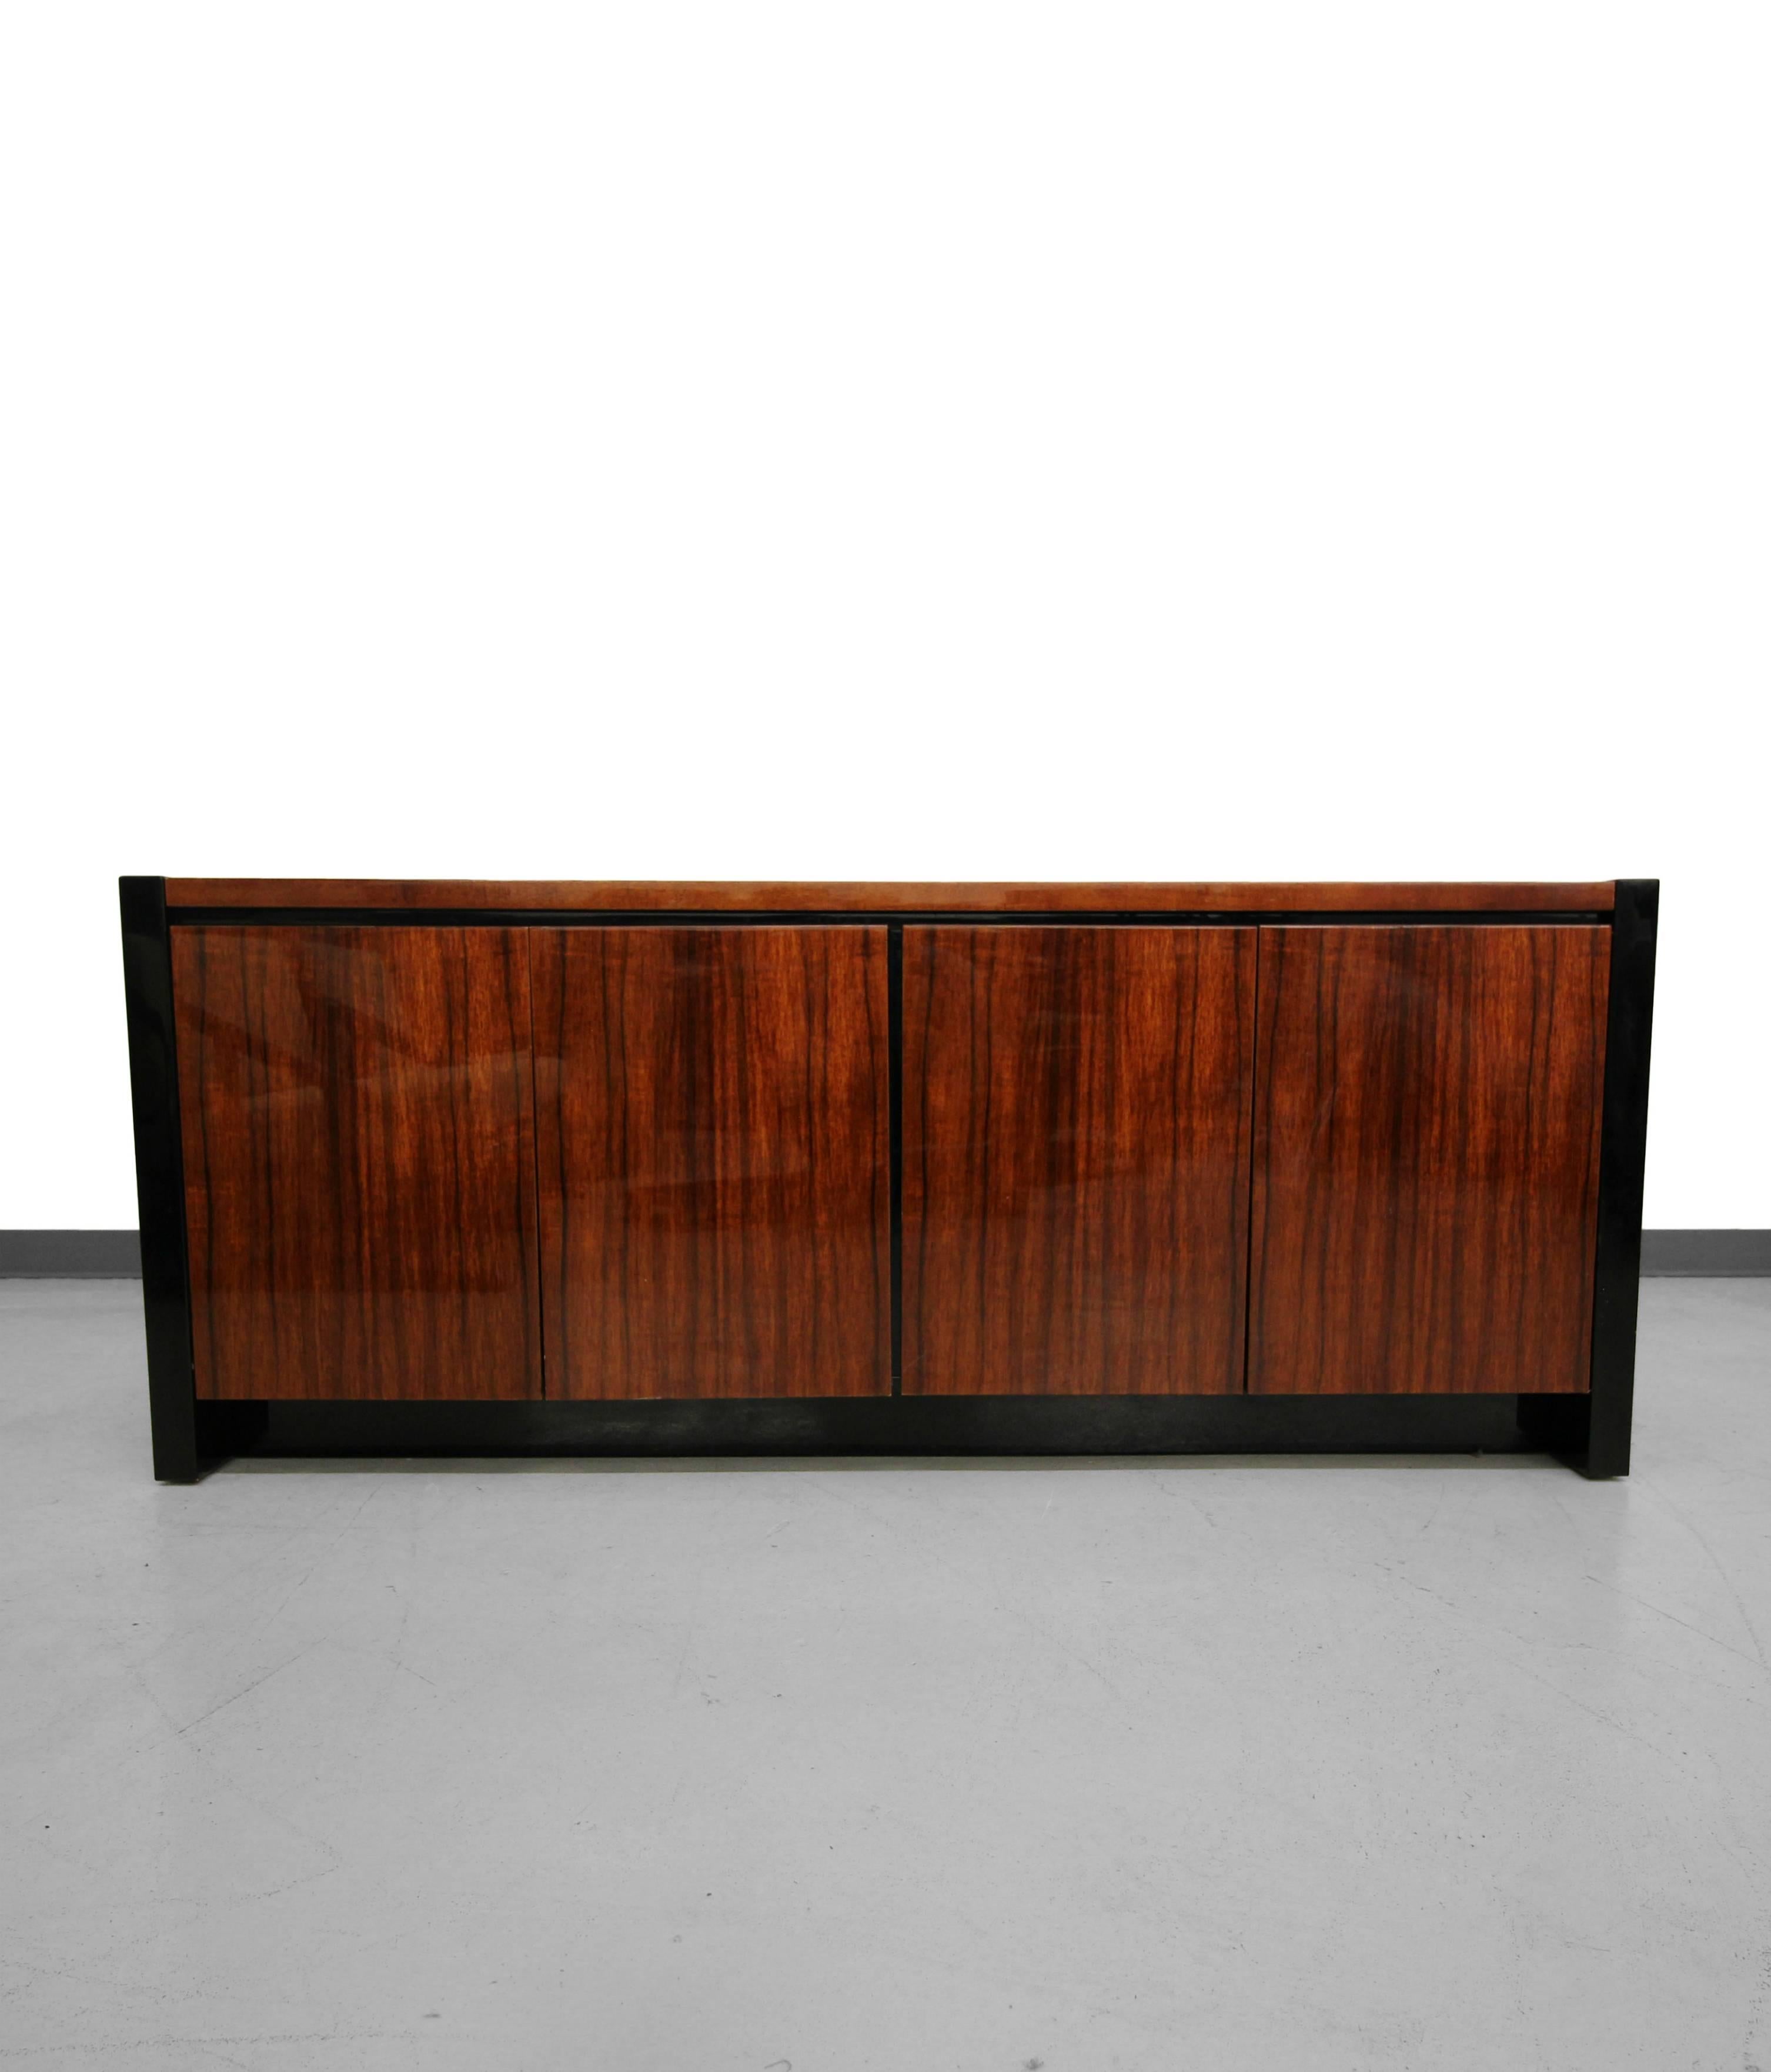 Absolutely stunning two-tiered, black lacquer and Koa wood credenza with brass details by Henredon for their Elan Collection. This is a jaw dropping piece of very versatile piece of case work. It can be used as a buffet, credenza, entertainment